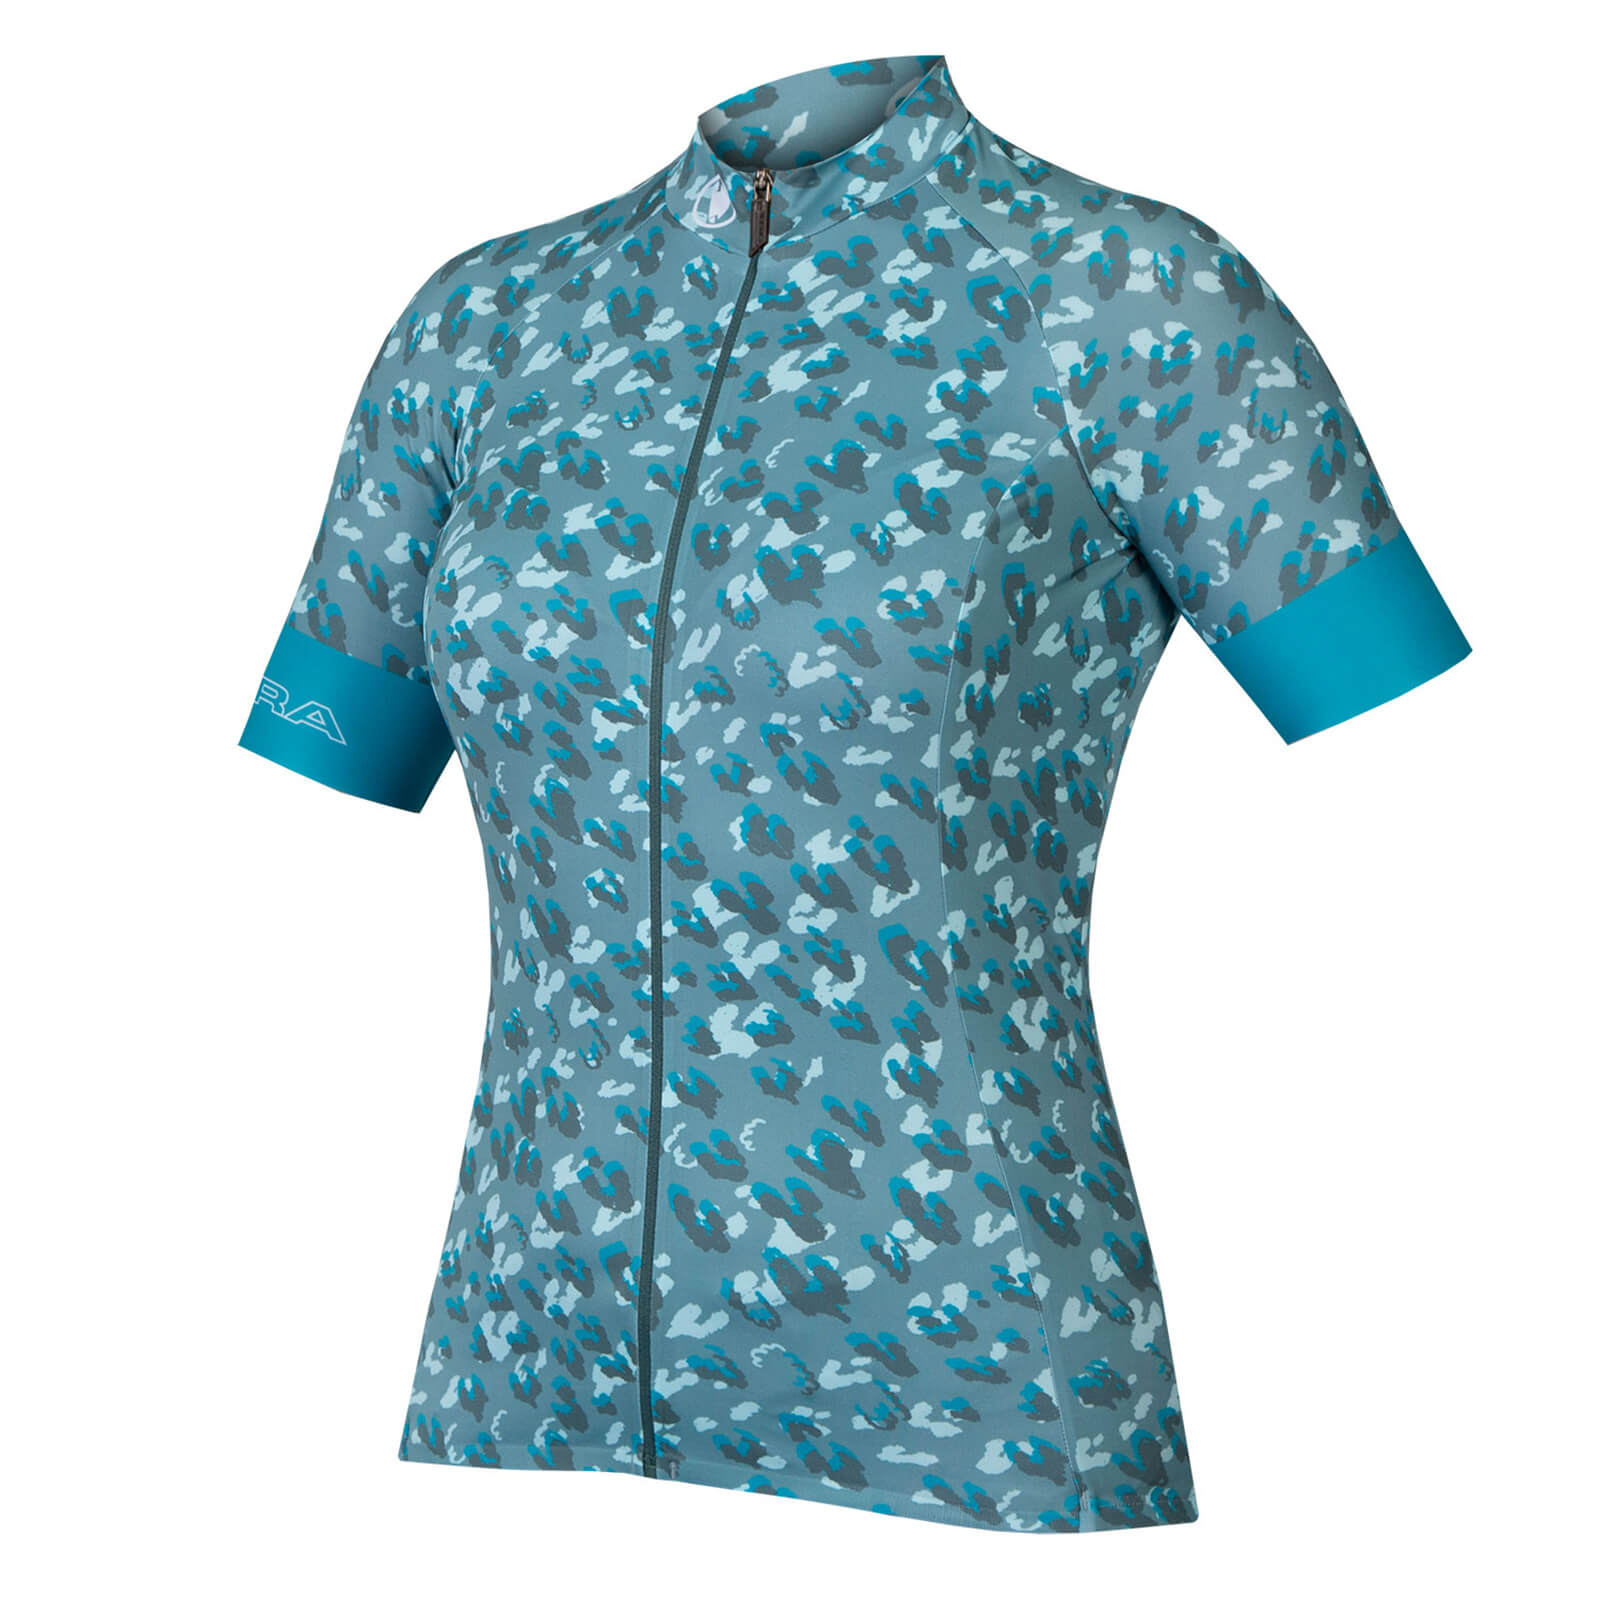 Womens Canimal S/s Jersey - Moss